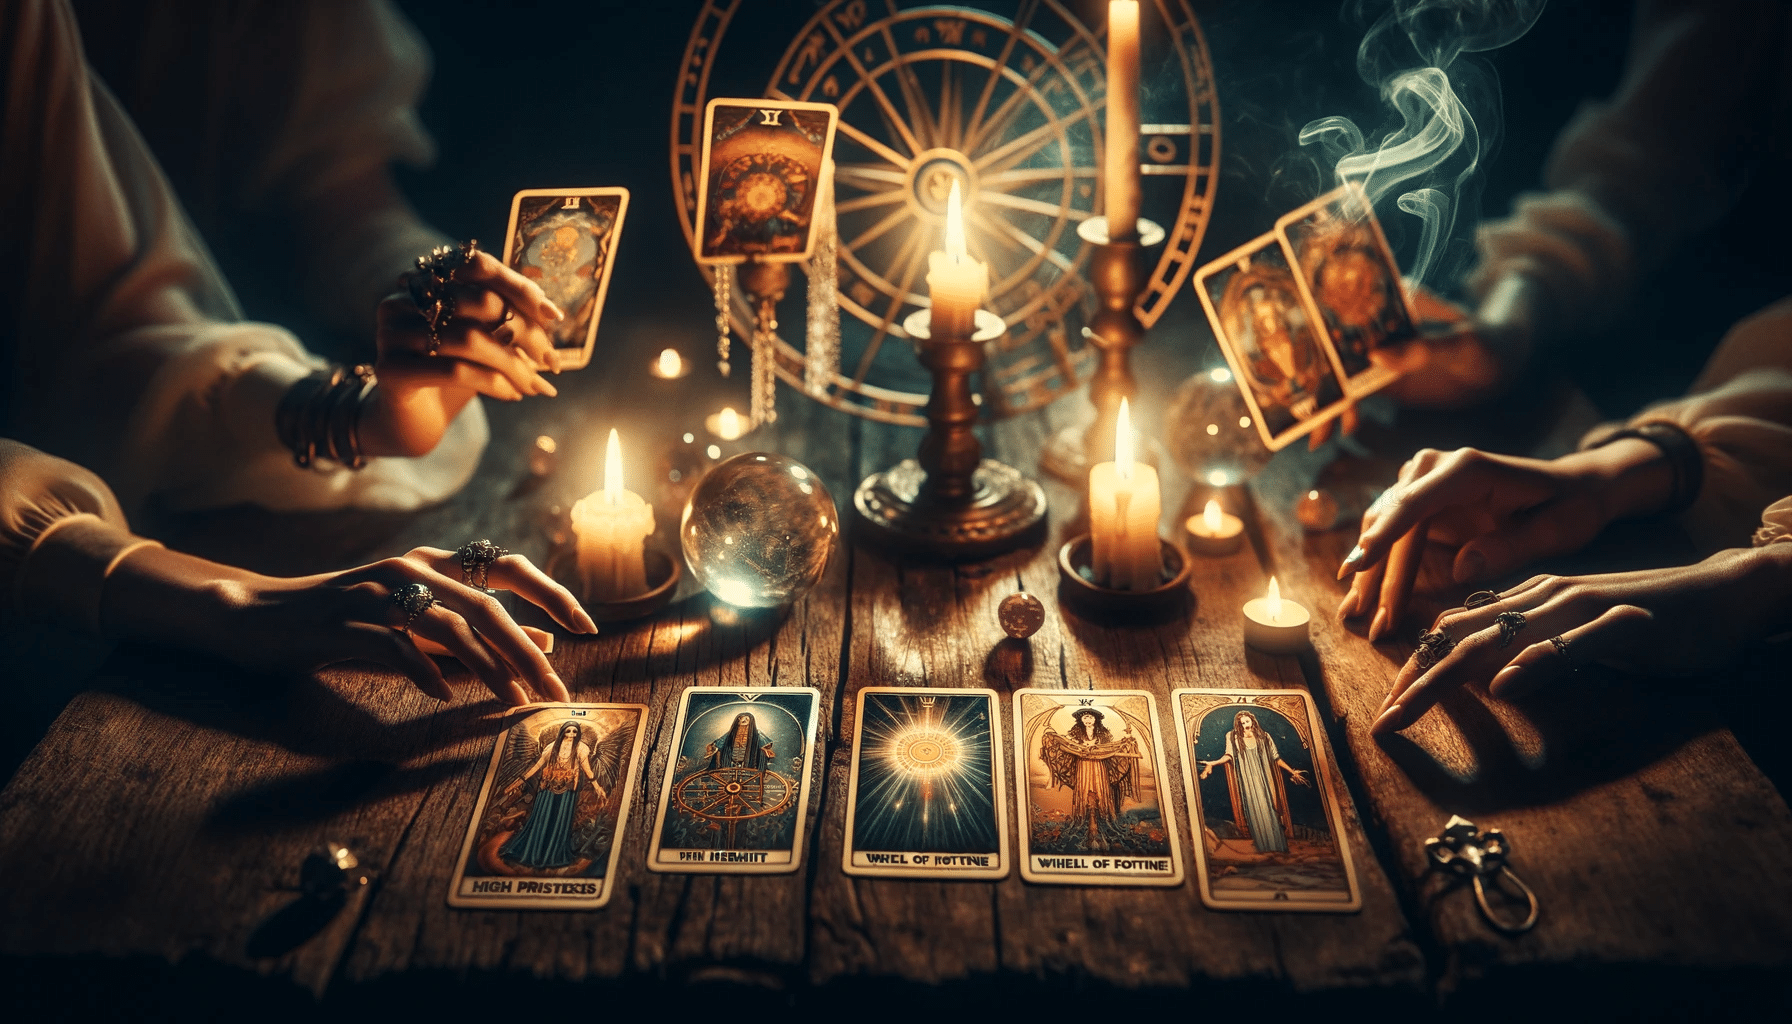 Four hands display tarot cards using advanced tarot card interpretation techniques on a mystical table with candles, crystal balls, and incense.